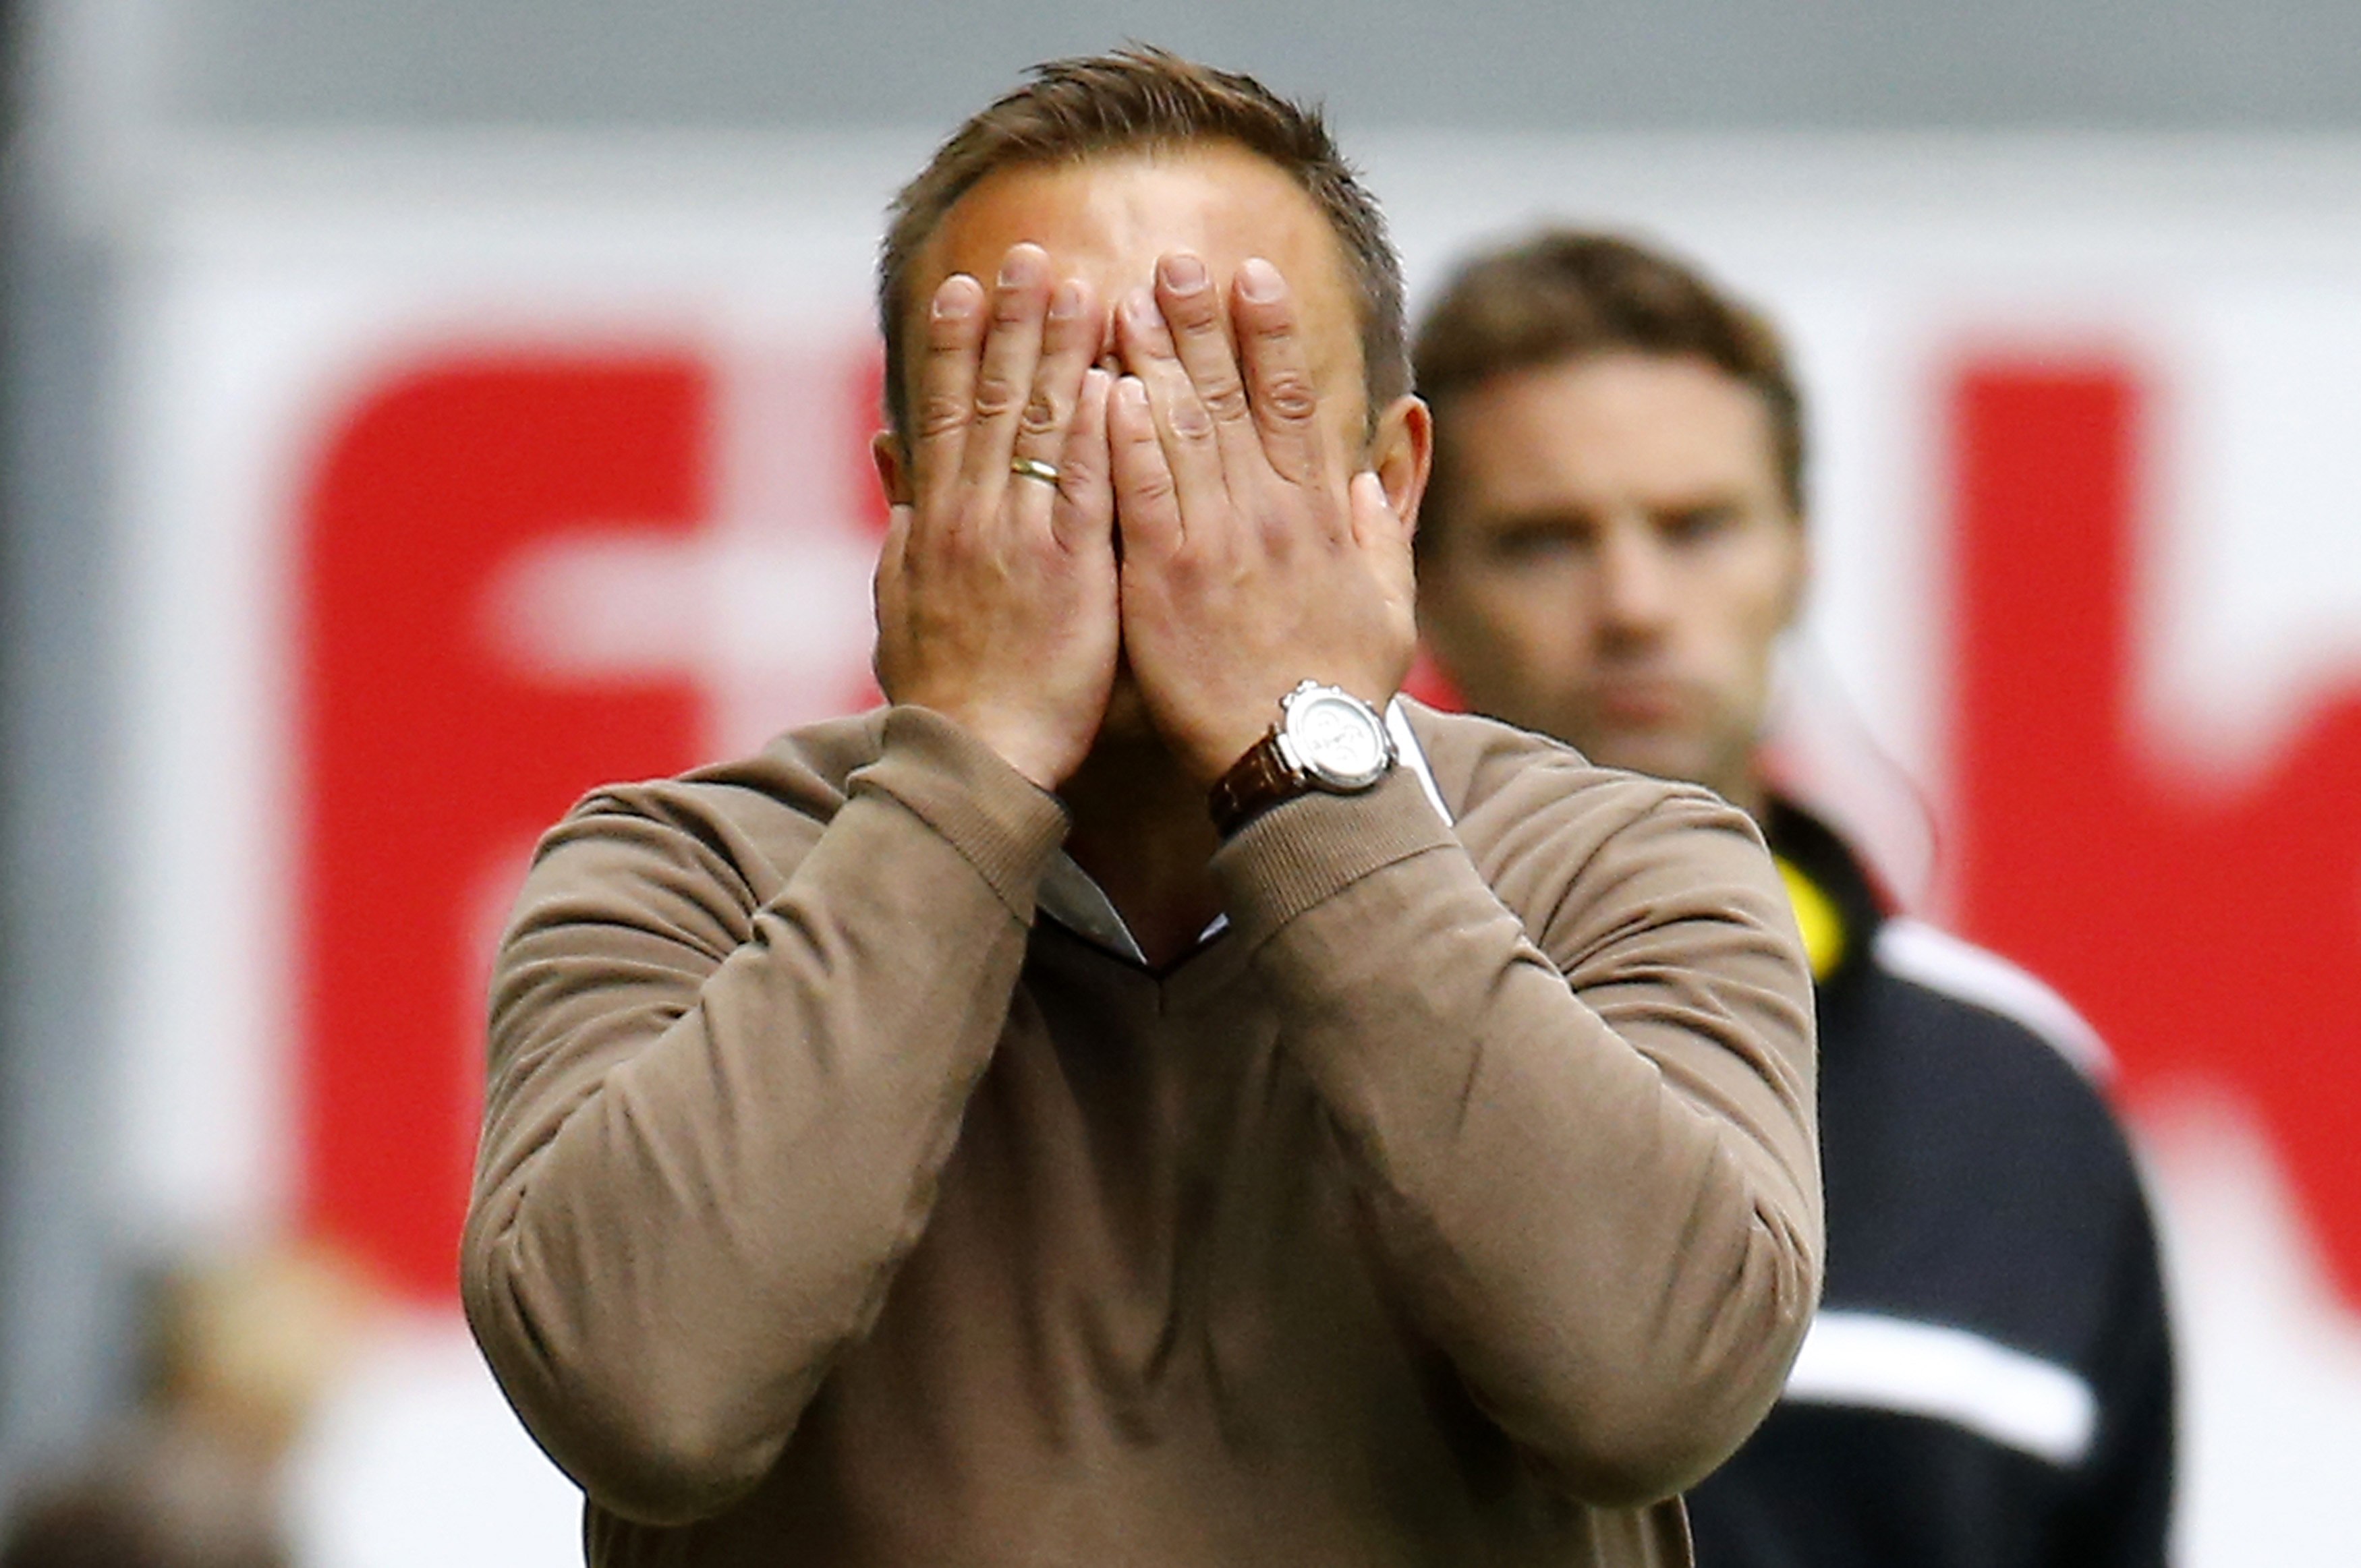 Andre Breitenreiter, coach of SC Paderborn reacts during their first ever German first division Bundesliga soccer match against FSV Mainz 05 in Paderborn, August 24, 2014. Paderborn finished last year's second division season second and was promoted into 